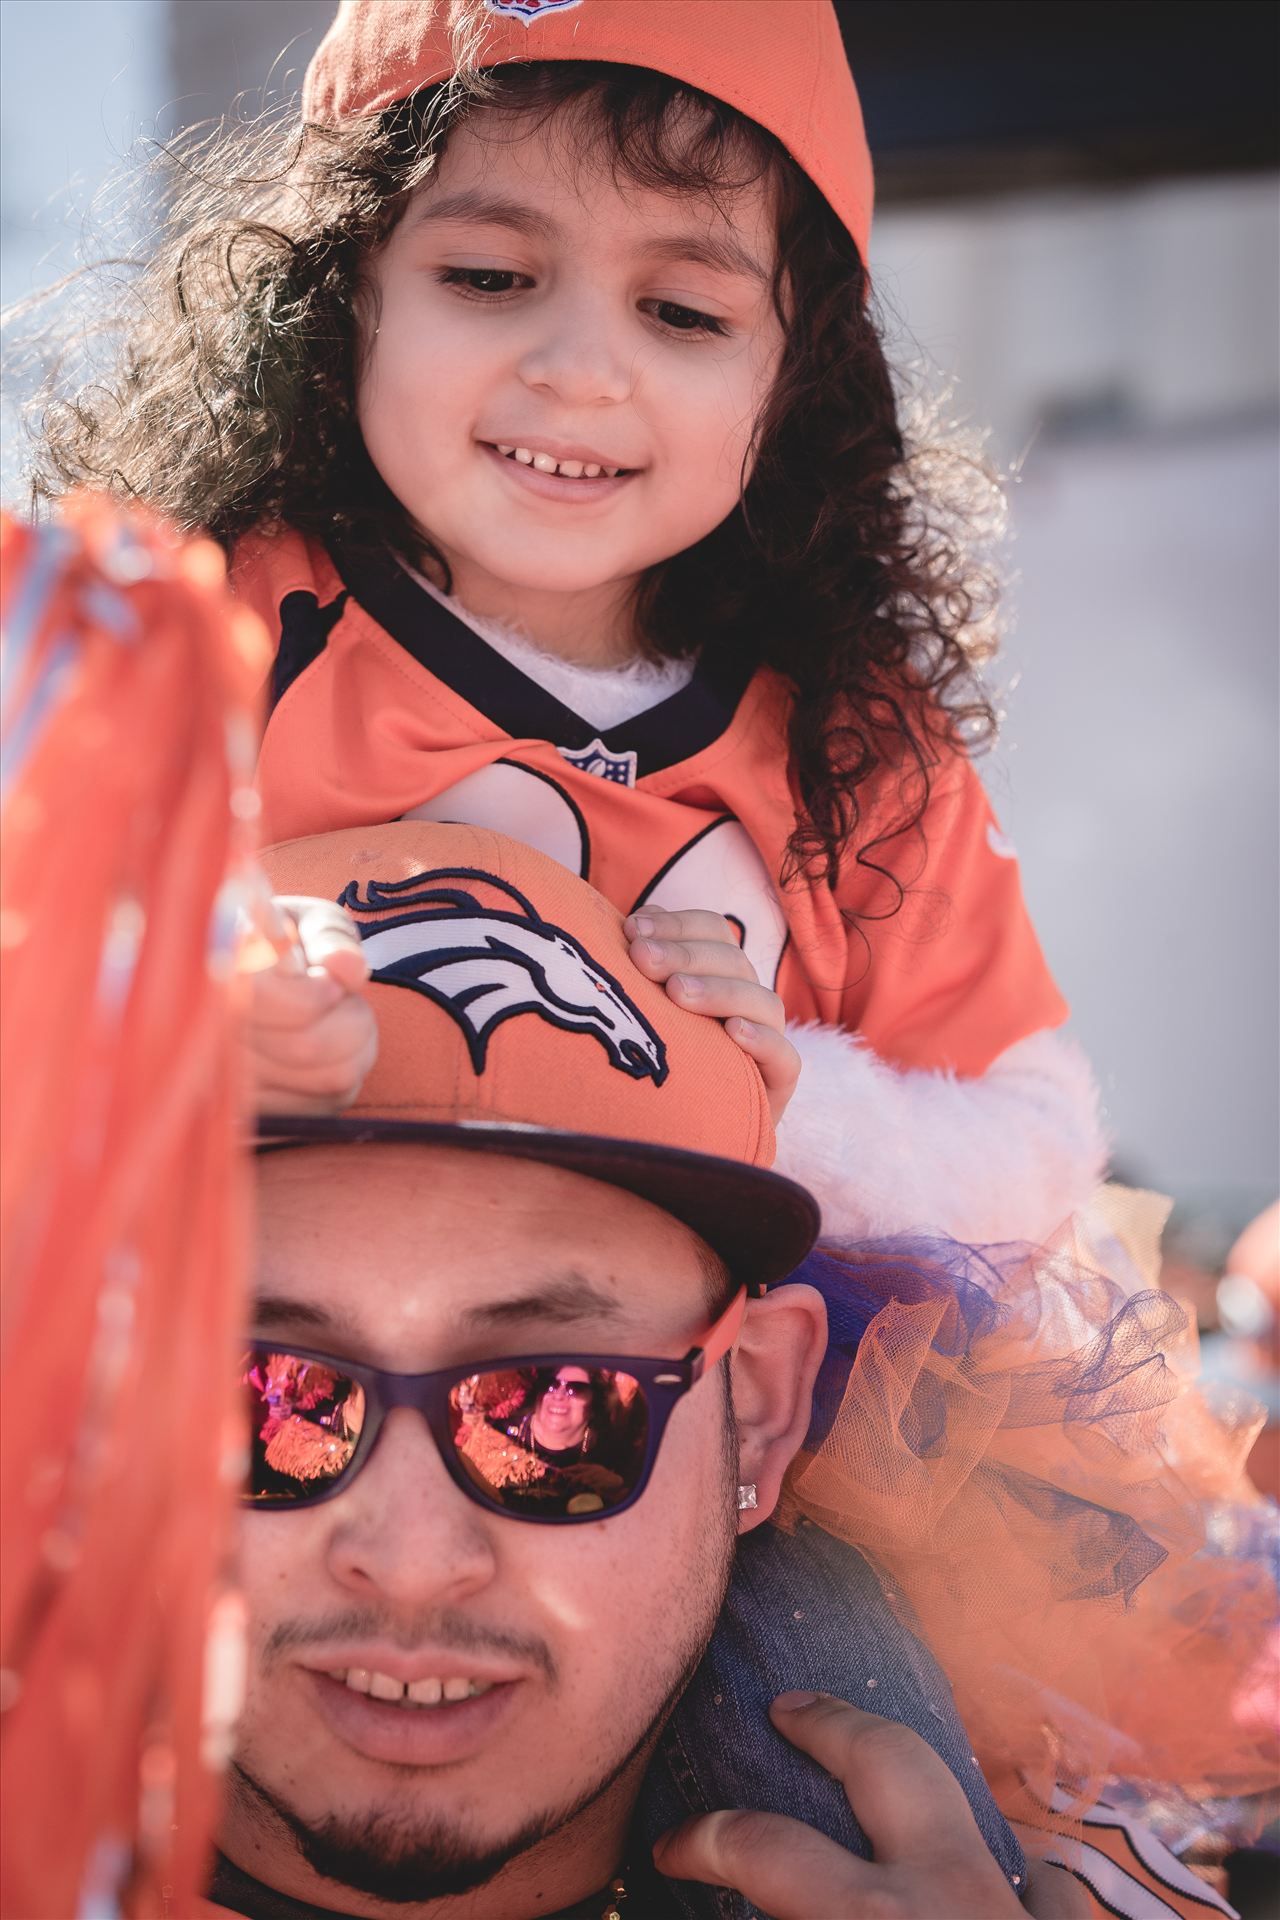 Father Daughter Broncos Fans - If you know who these two are... please contact me! I'd love to pass their photo long to them. by Scott Smith Photos